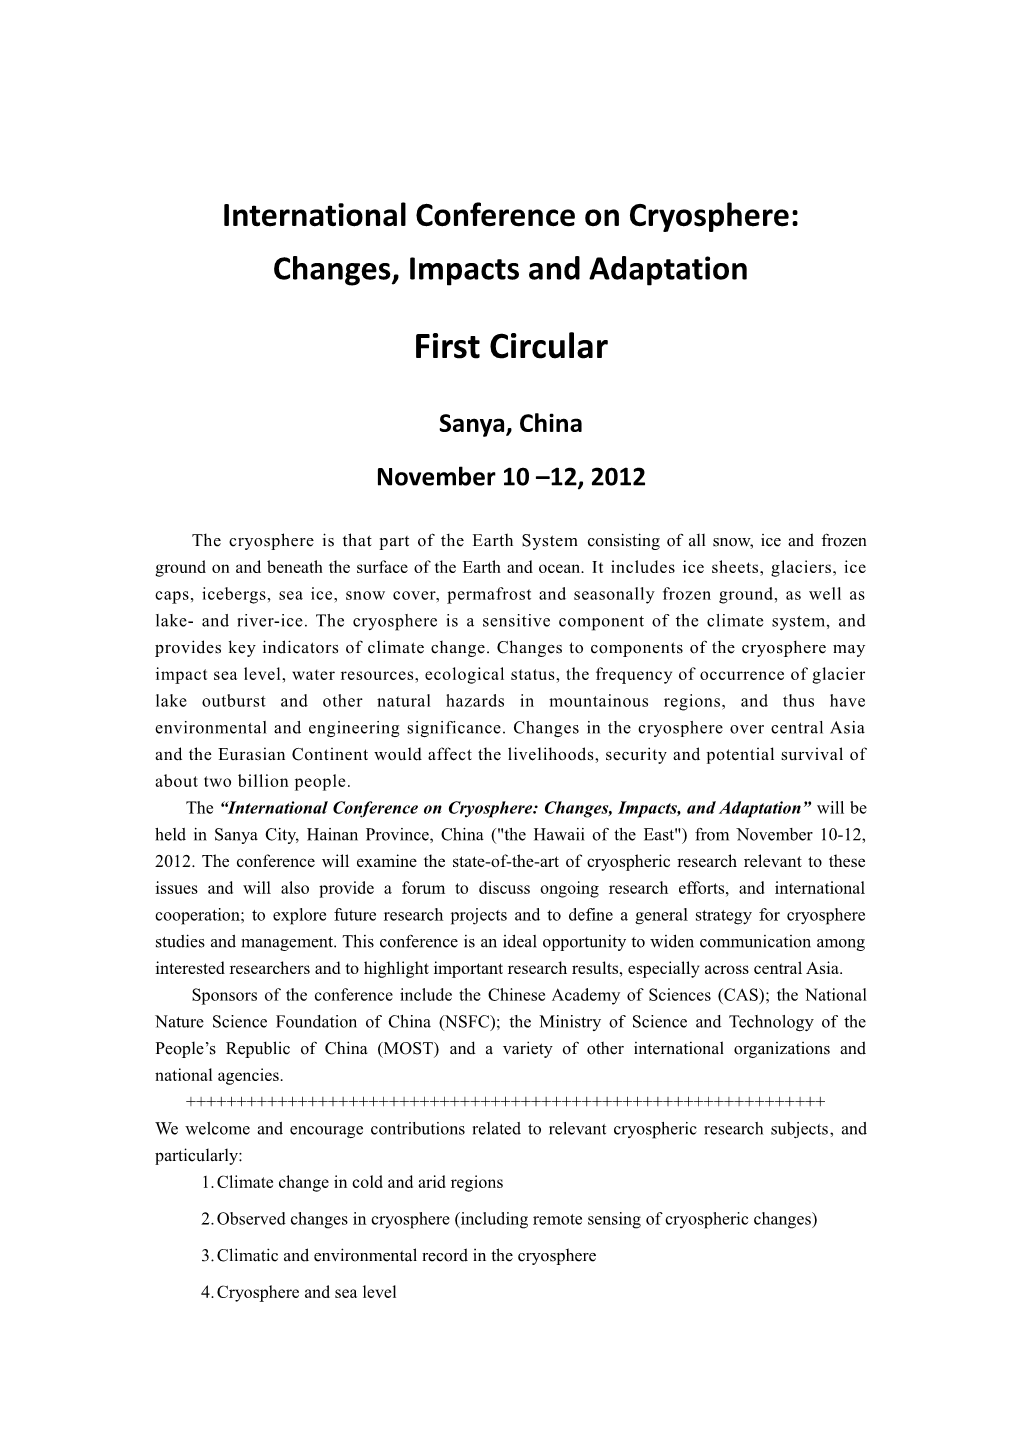 International Conference on Cryosphere: Changes, Impacts and Adaptation